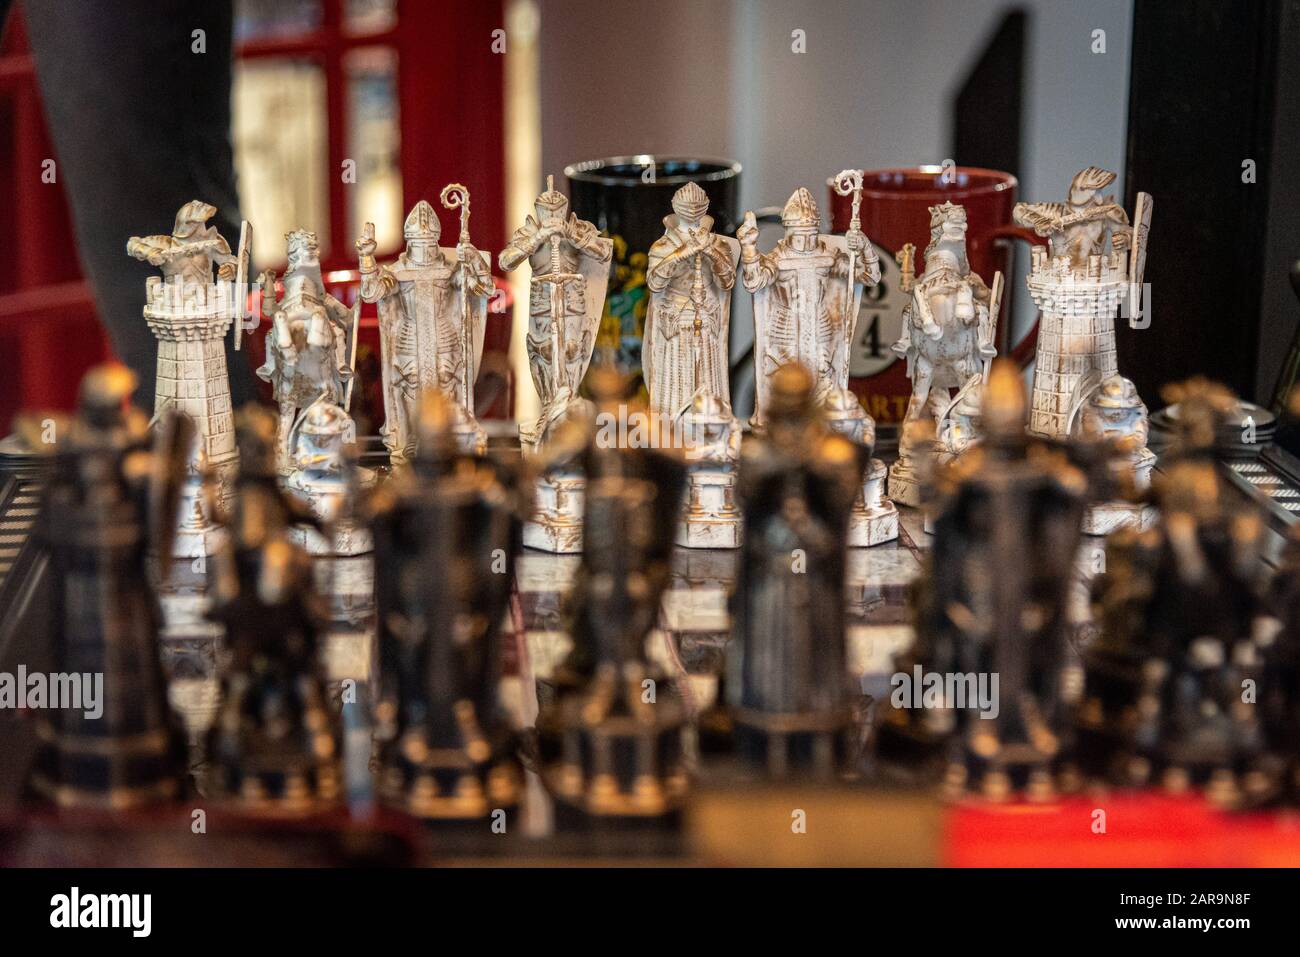 LIVERPOOL, ENGLAND, DECEMBER 27, 2018: The Wizard Chess model. Figurines of the Harry Potter chess game. Focused on whites while blacks are in bokeh. Stock Photo